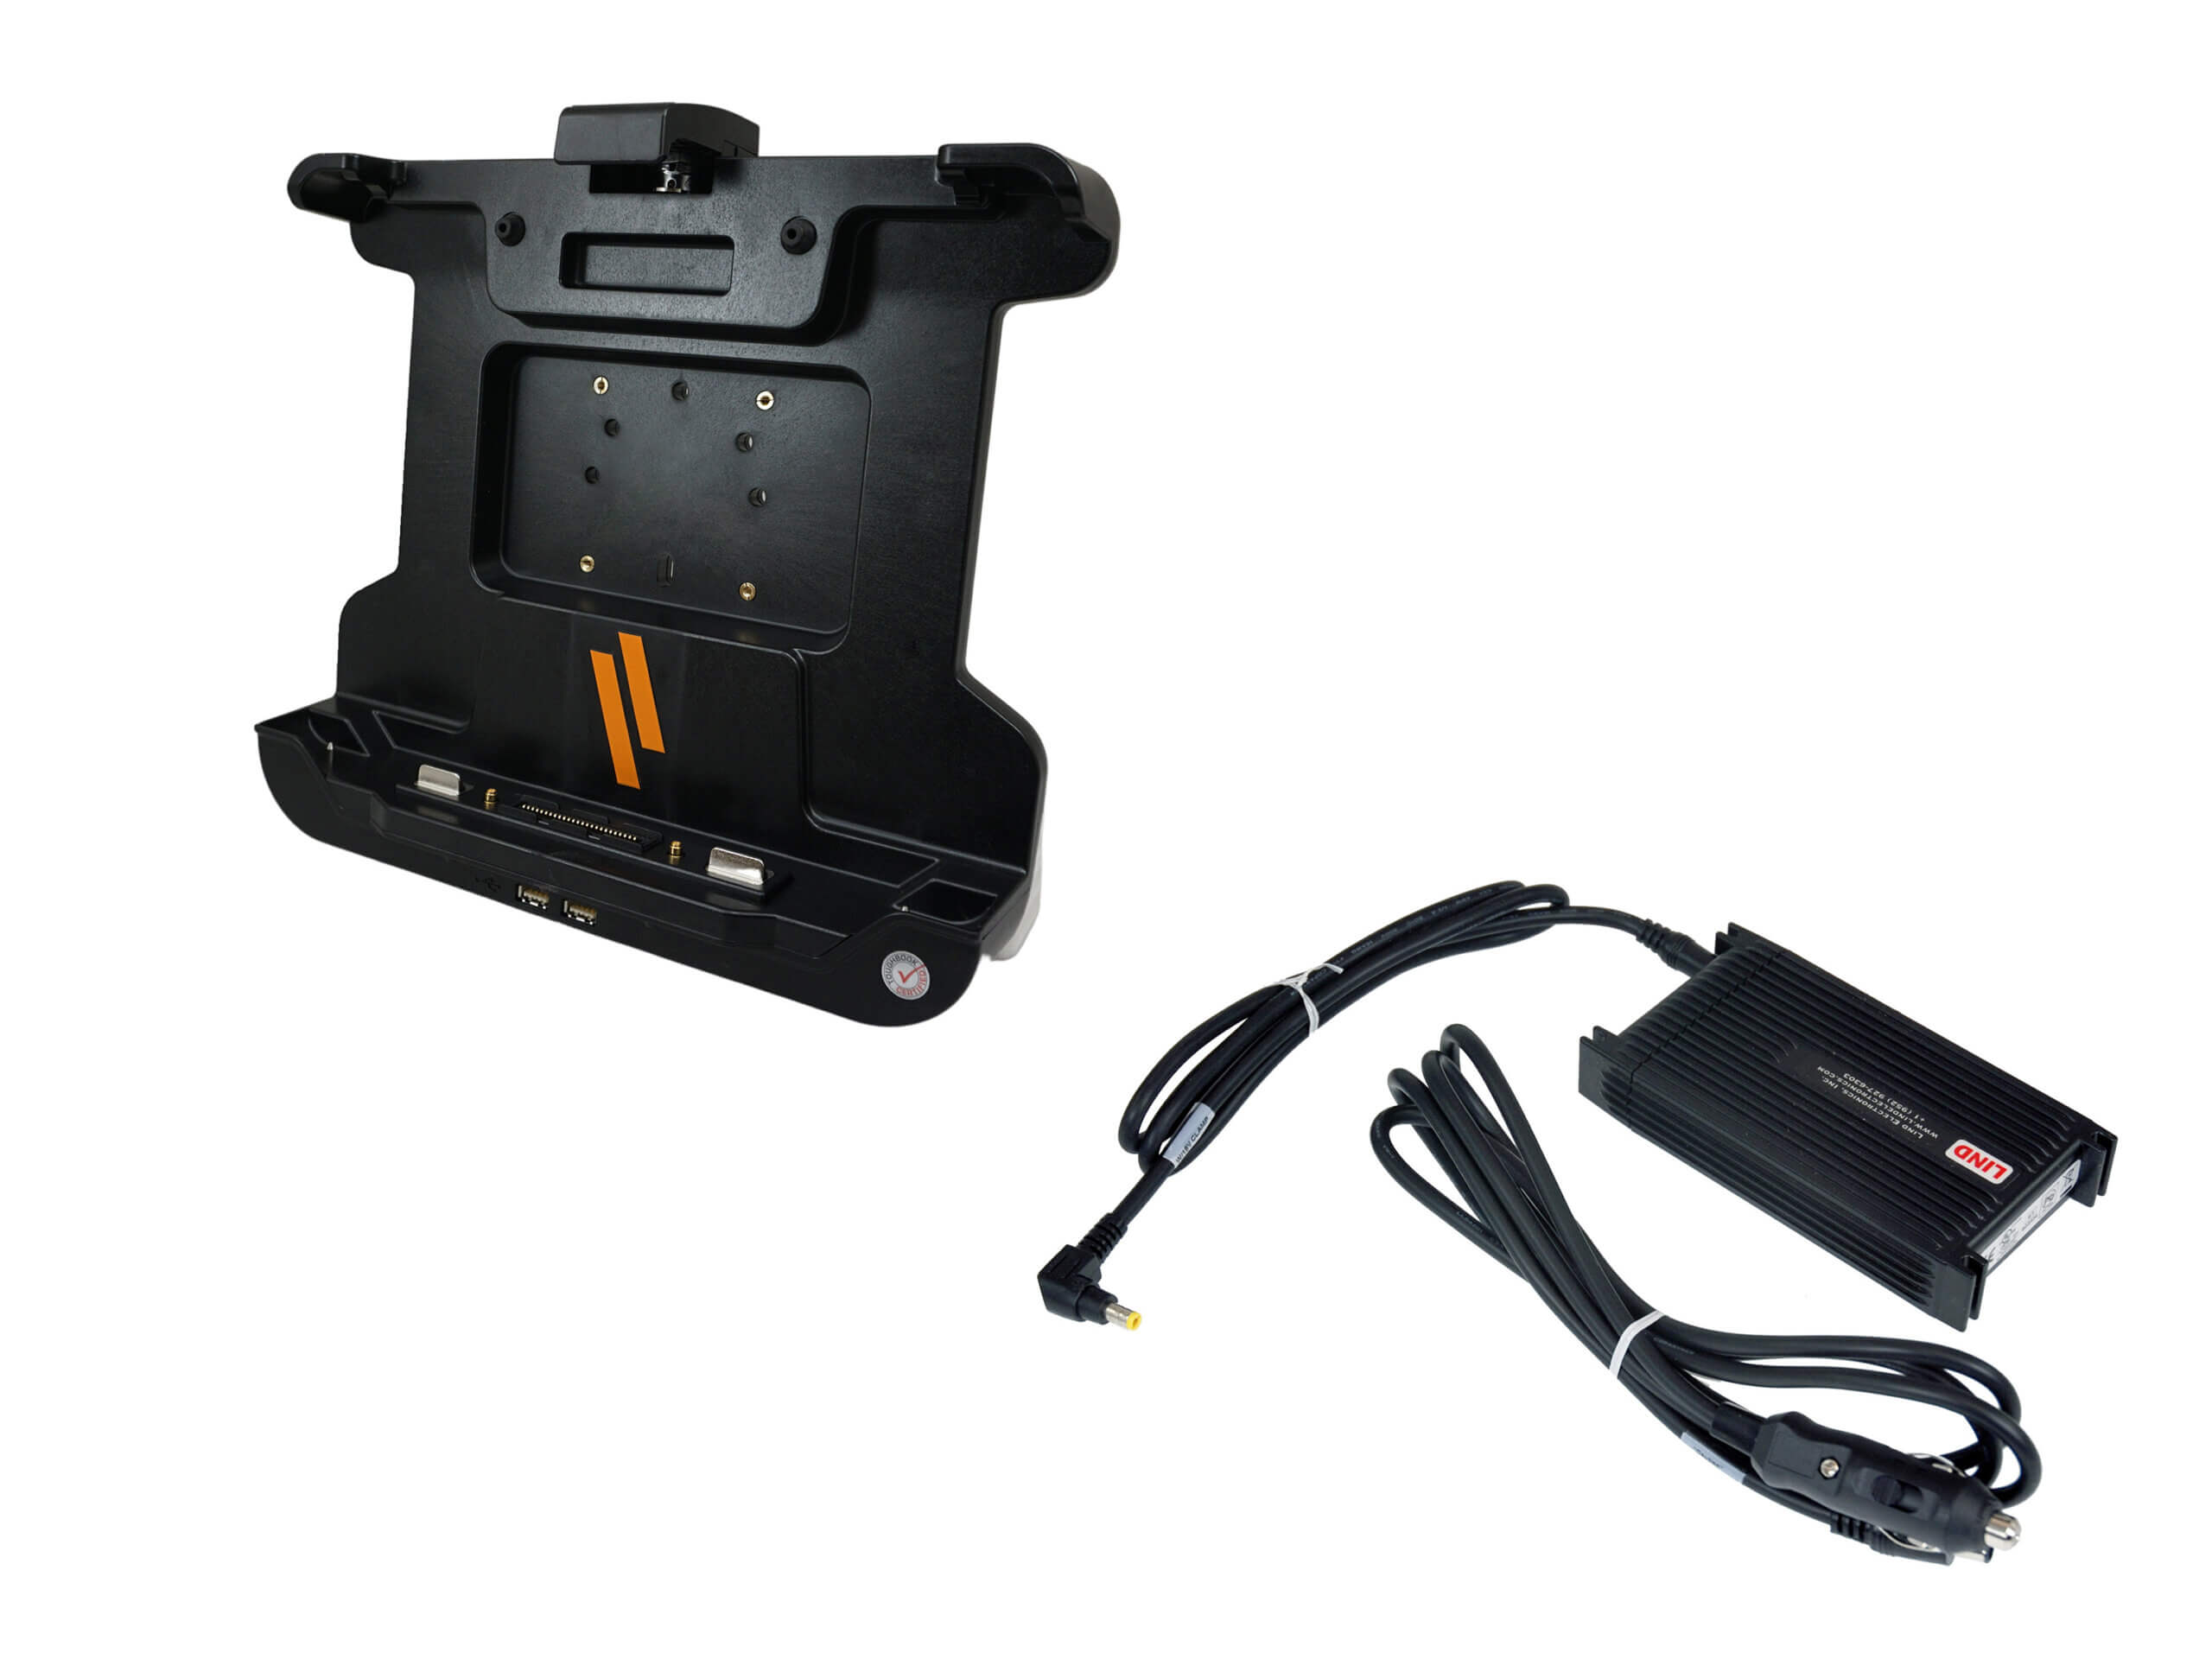 Docking Station For Panasonic TOUGHBOOK 33 Tablet with Advanced Port Replication & Dual Pass-Thru Antenna Connections & LIND Power Supply